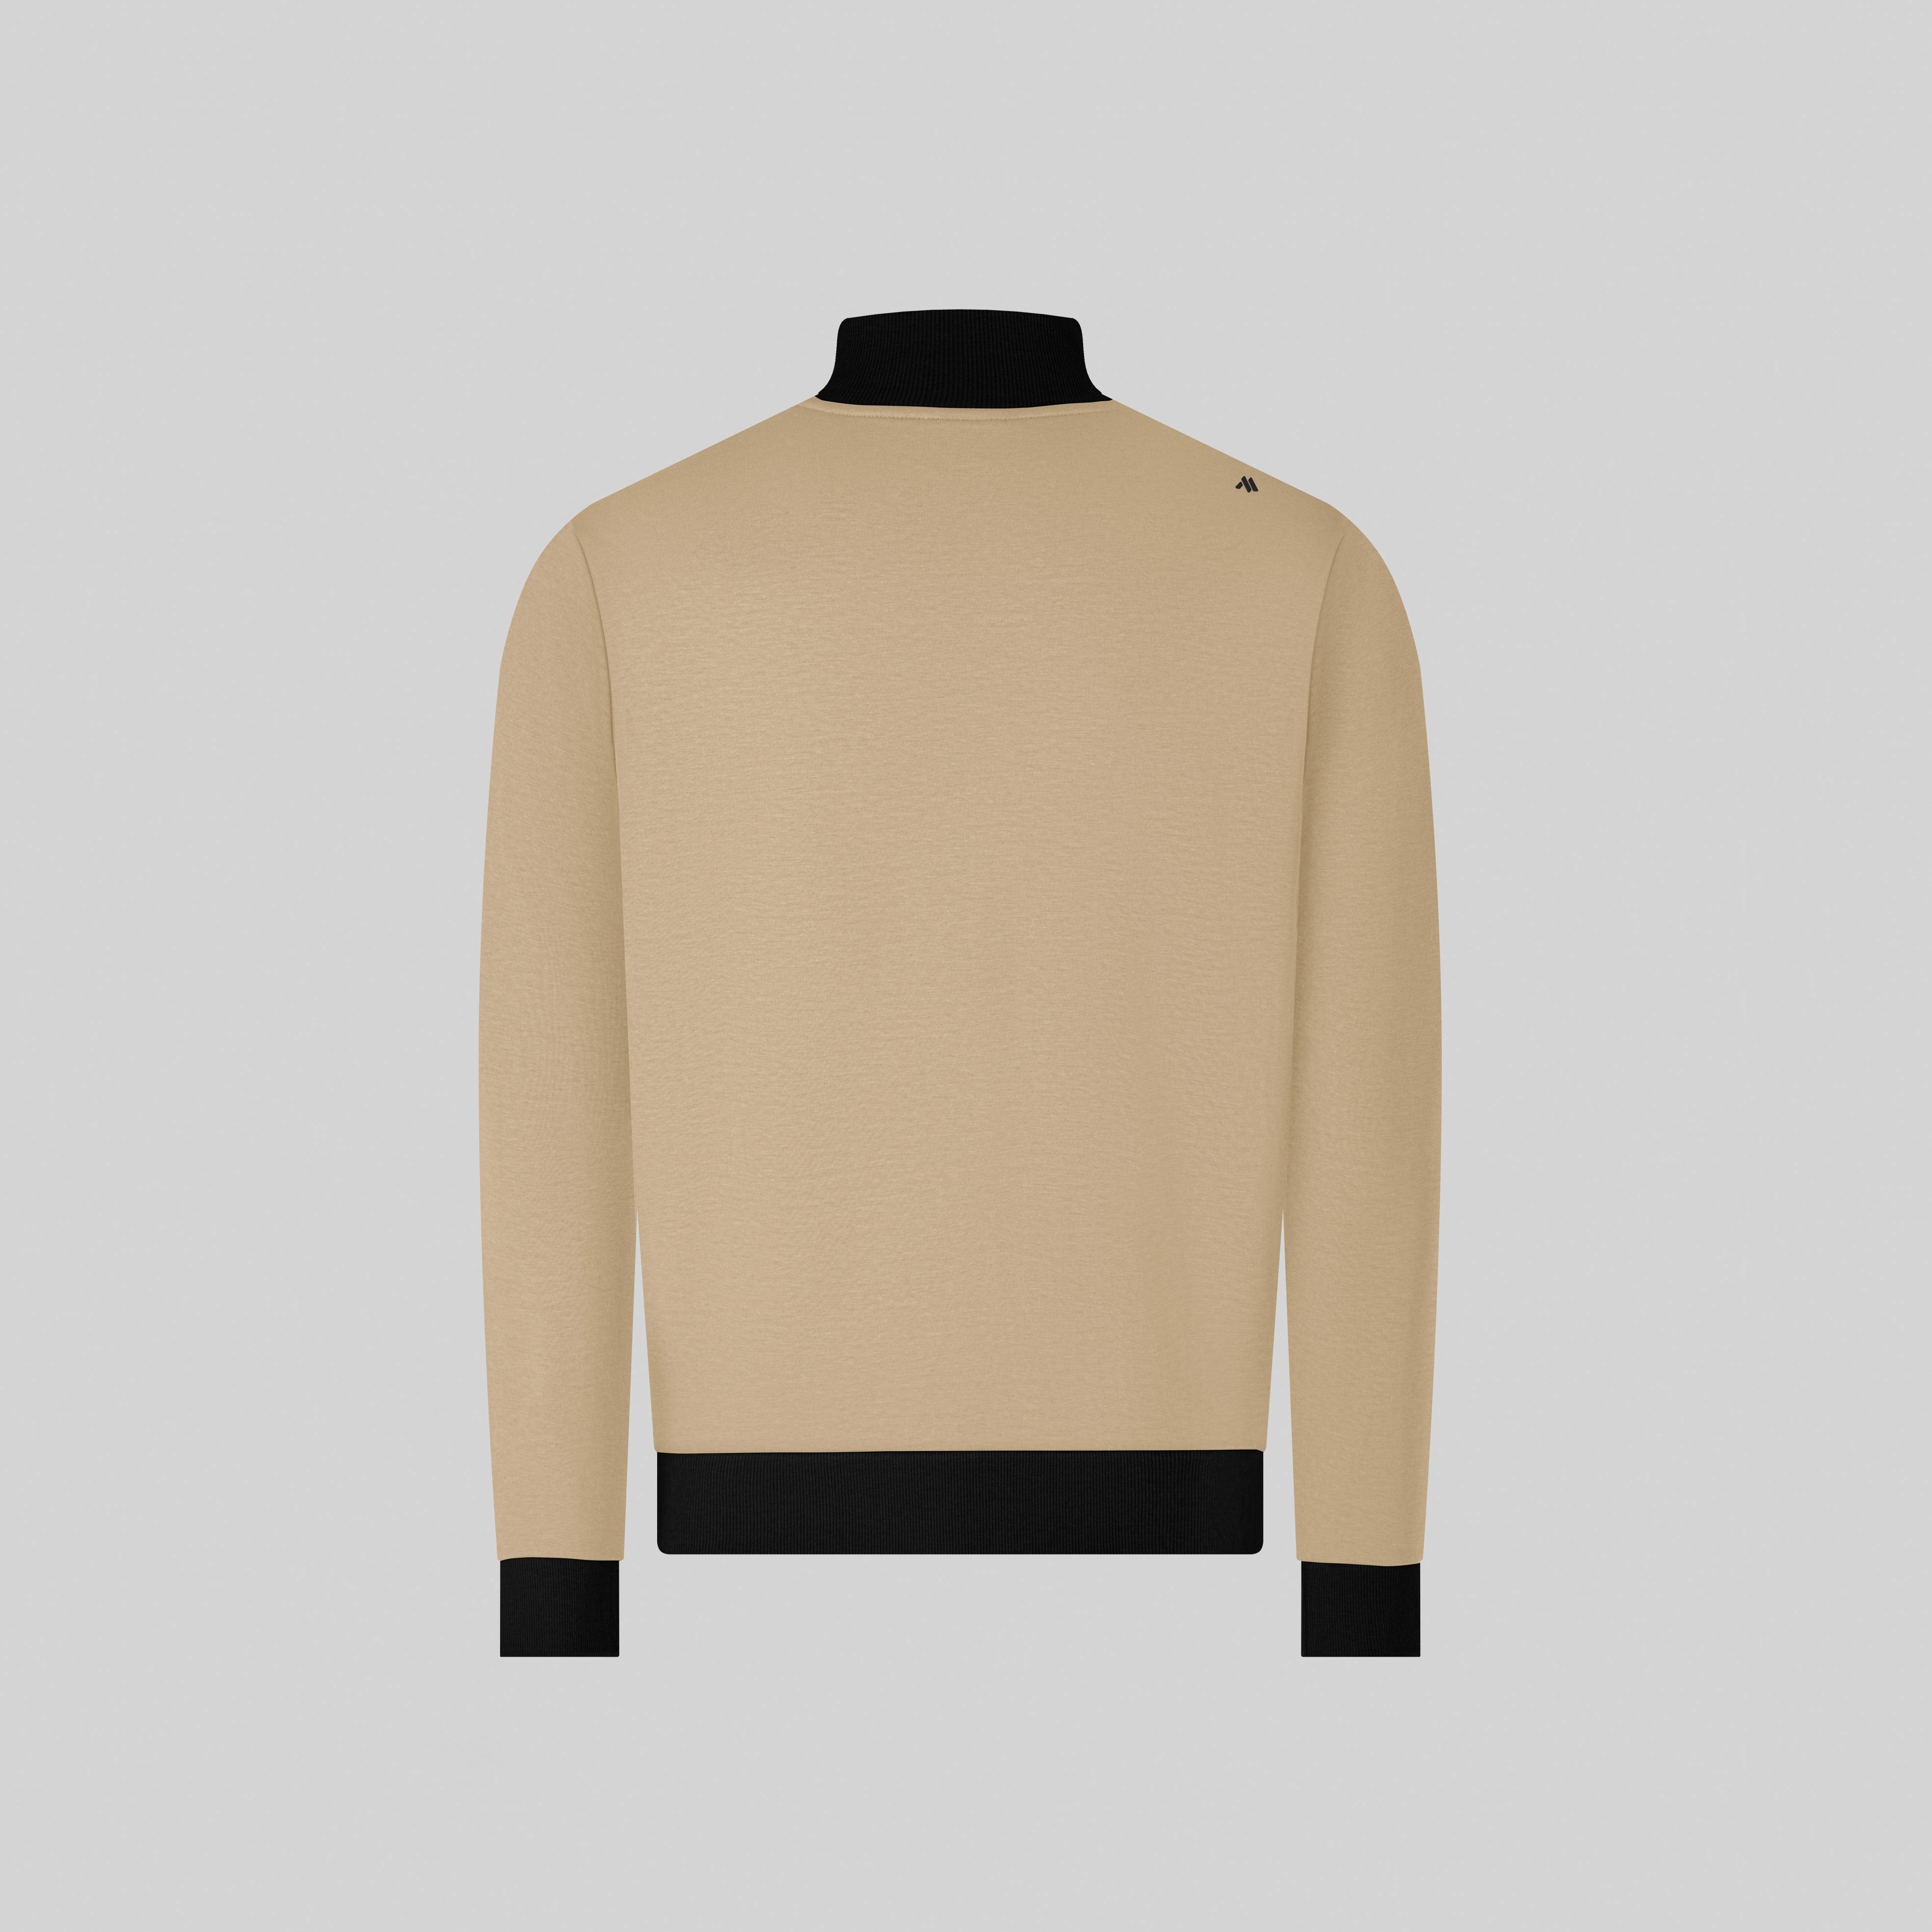 TAIGETO CAMEL SPORT JACKET | Monastery Couture